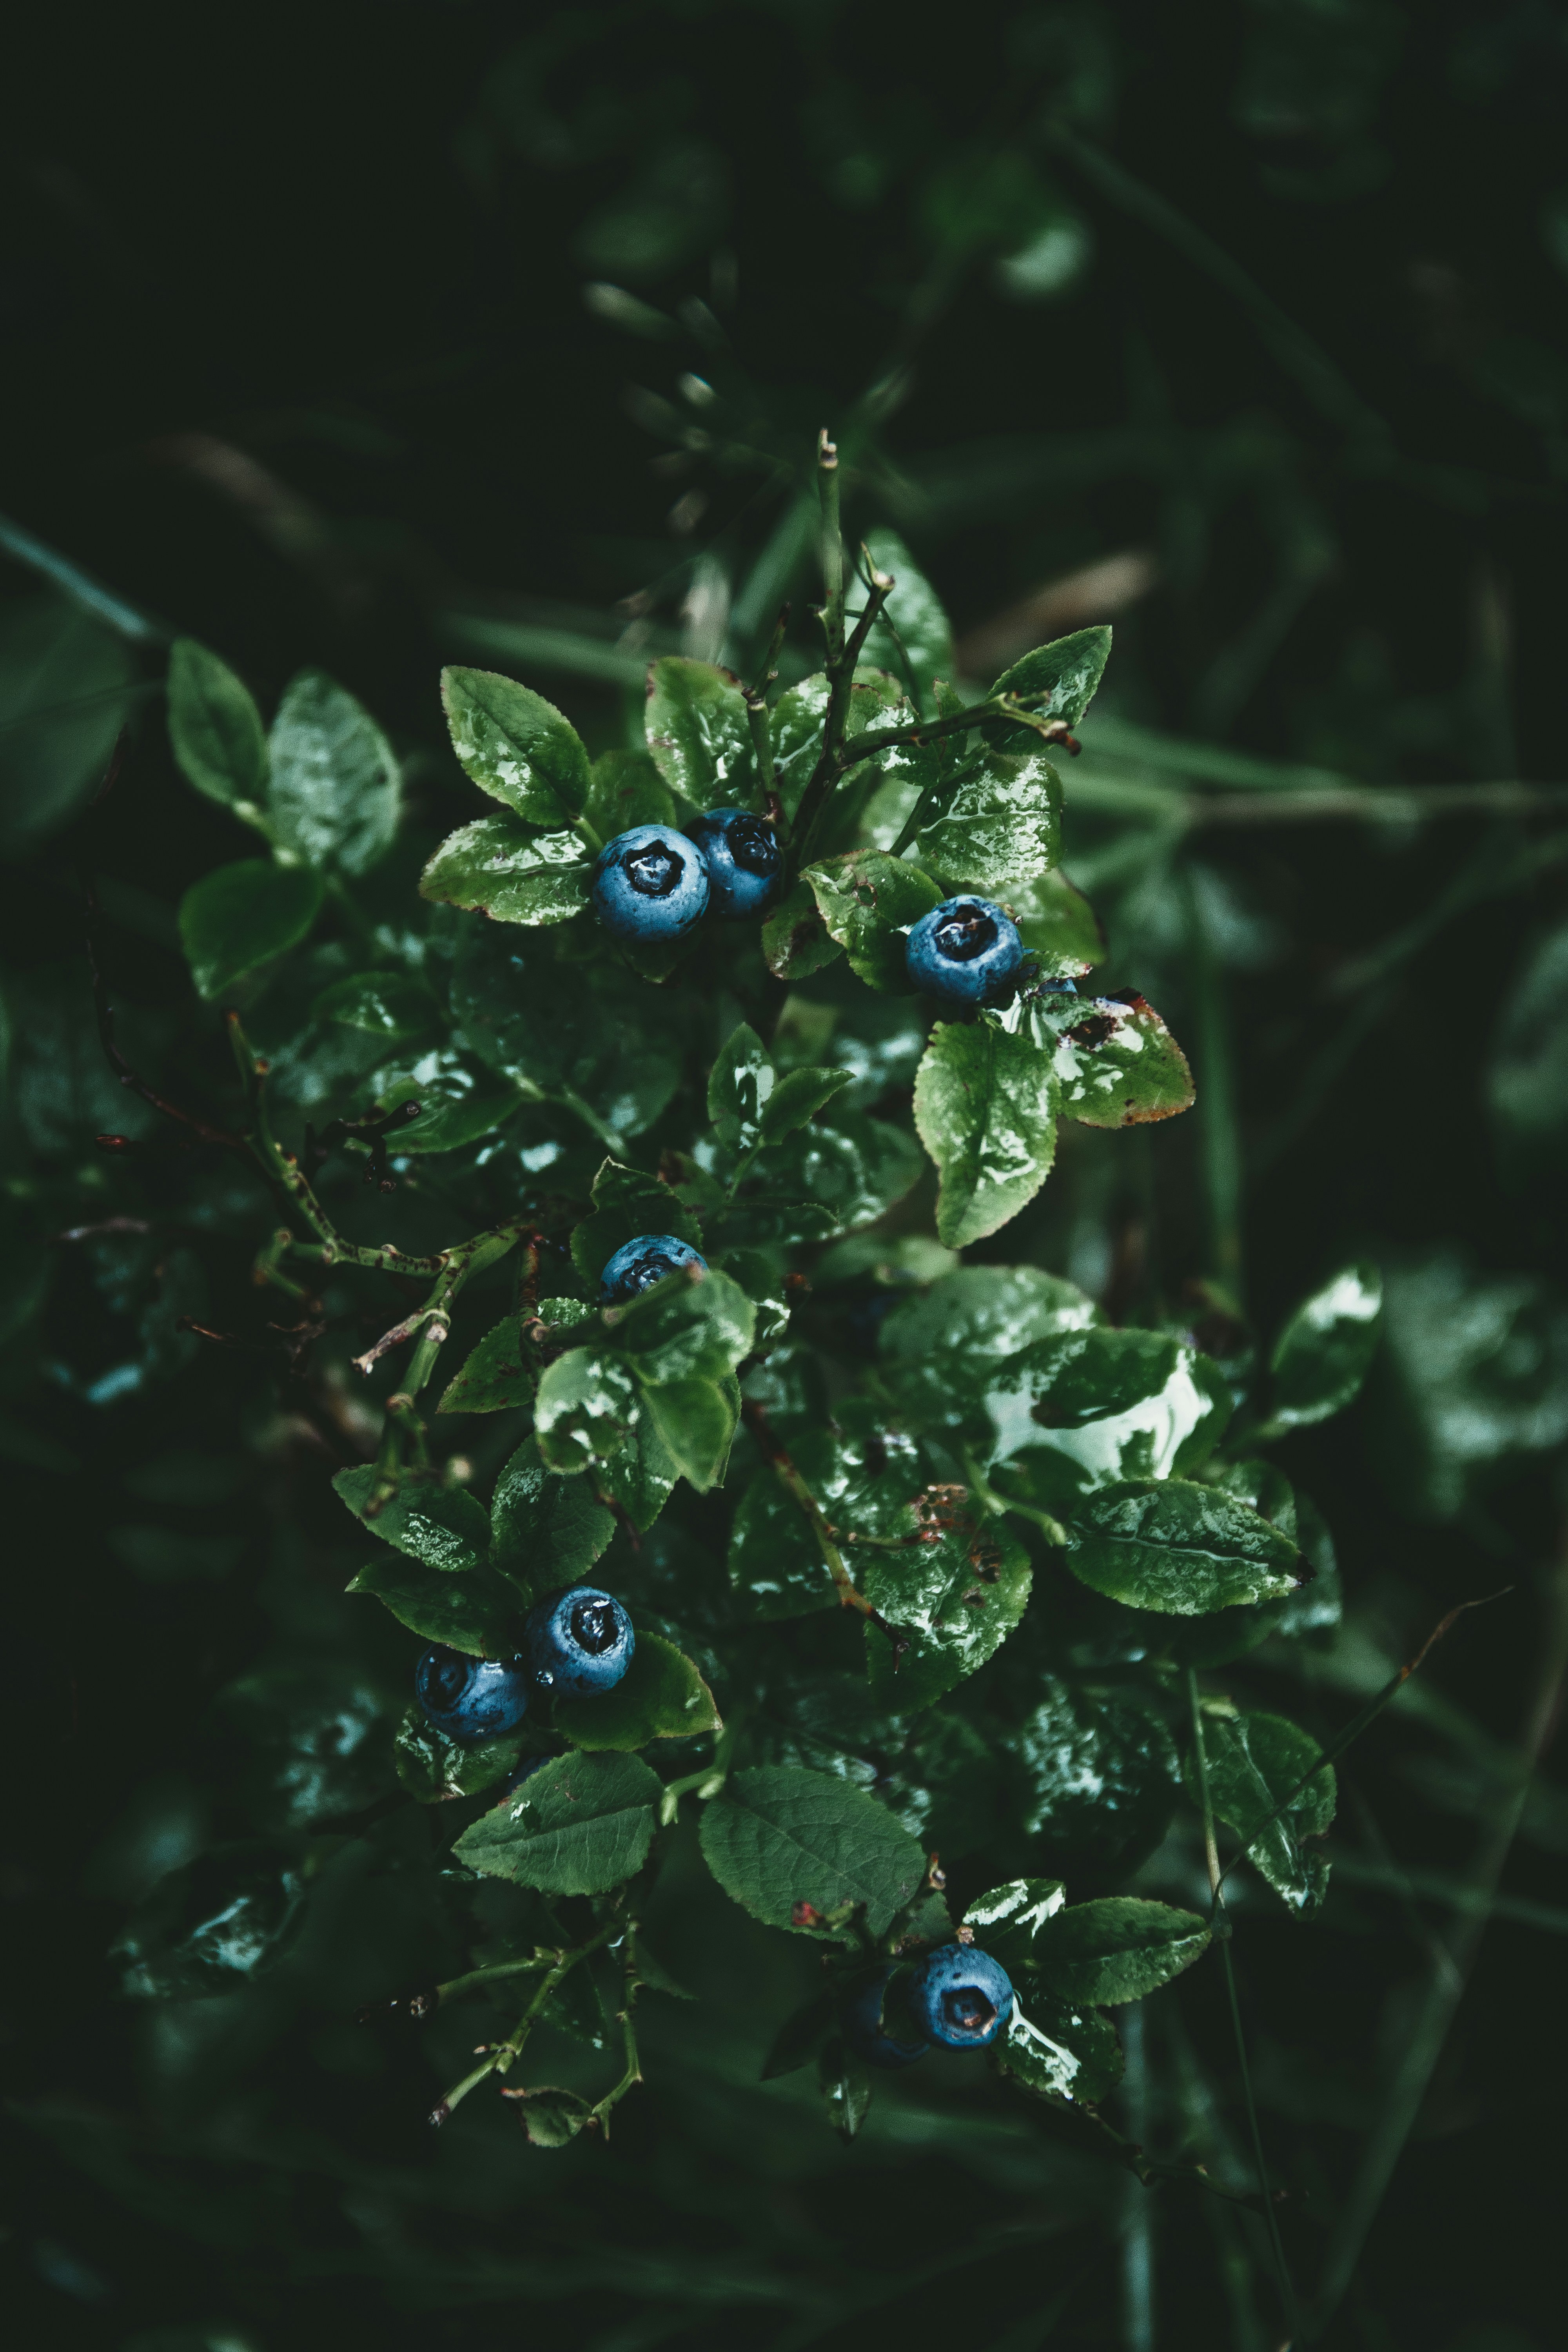 On a walk in the woods of lower saxony, you cannot miss the wild blueberrys growing around every corner.